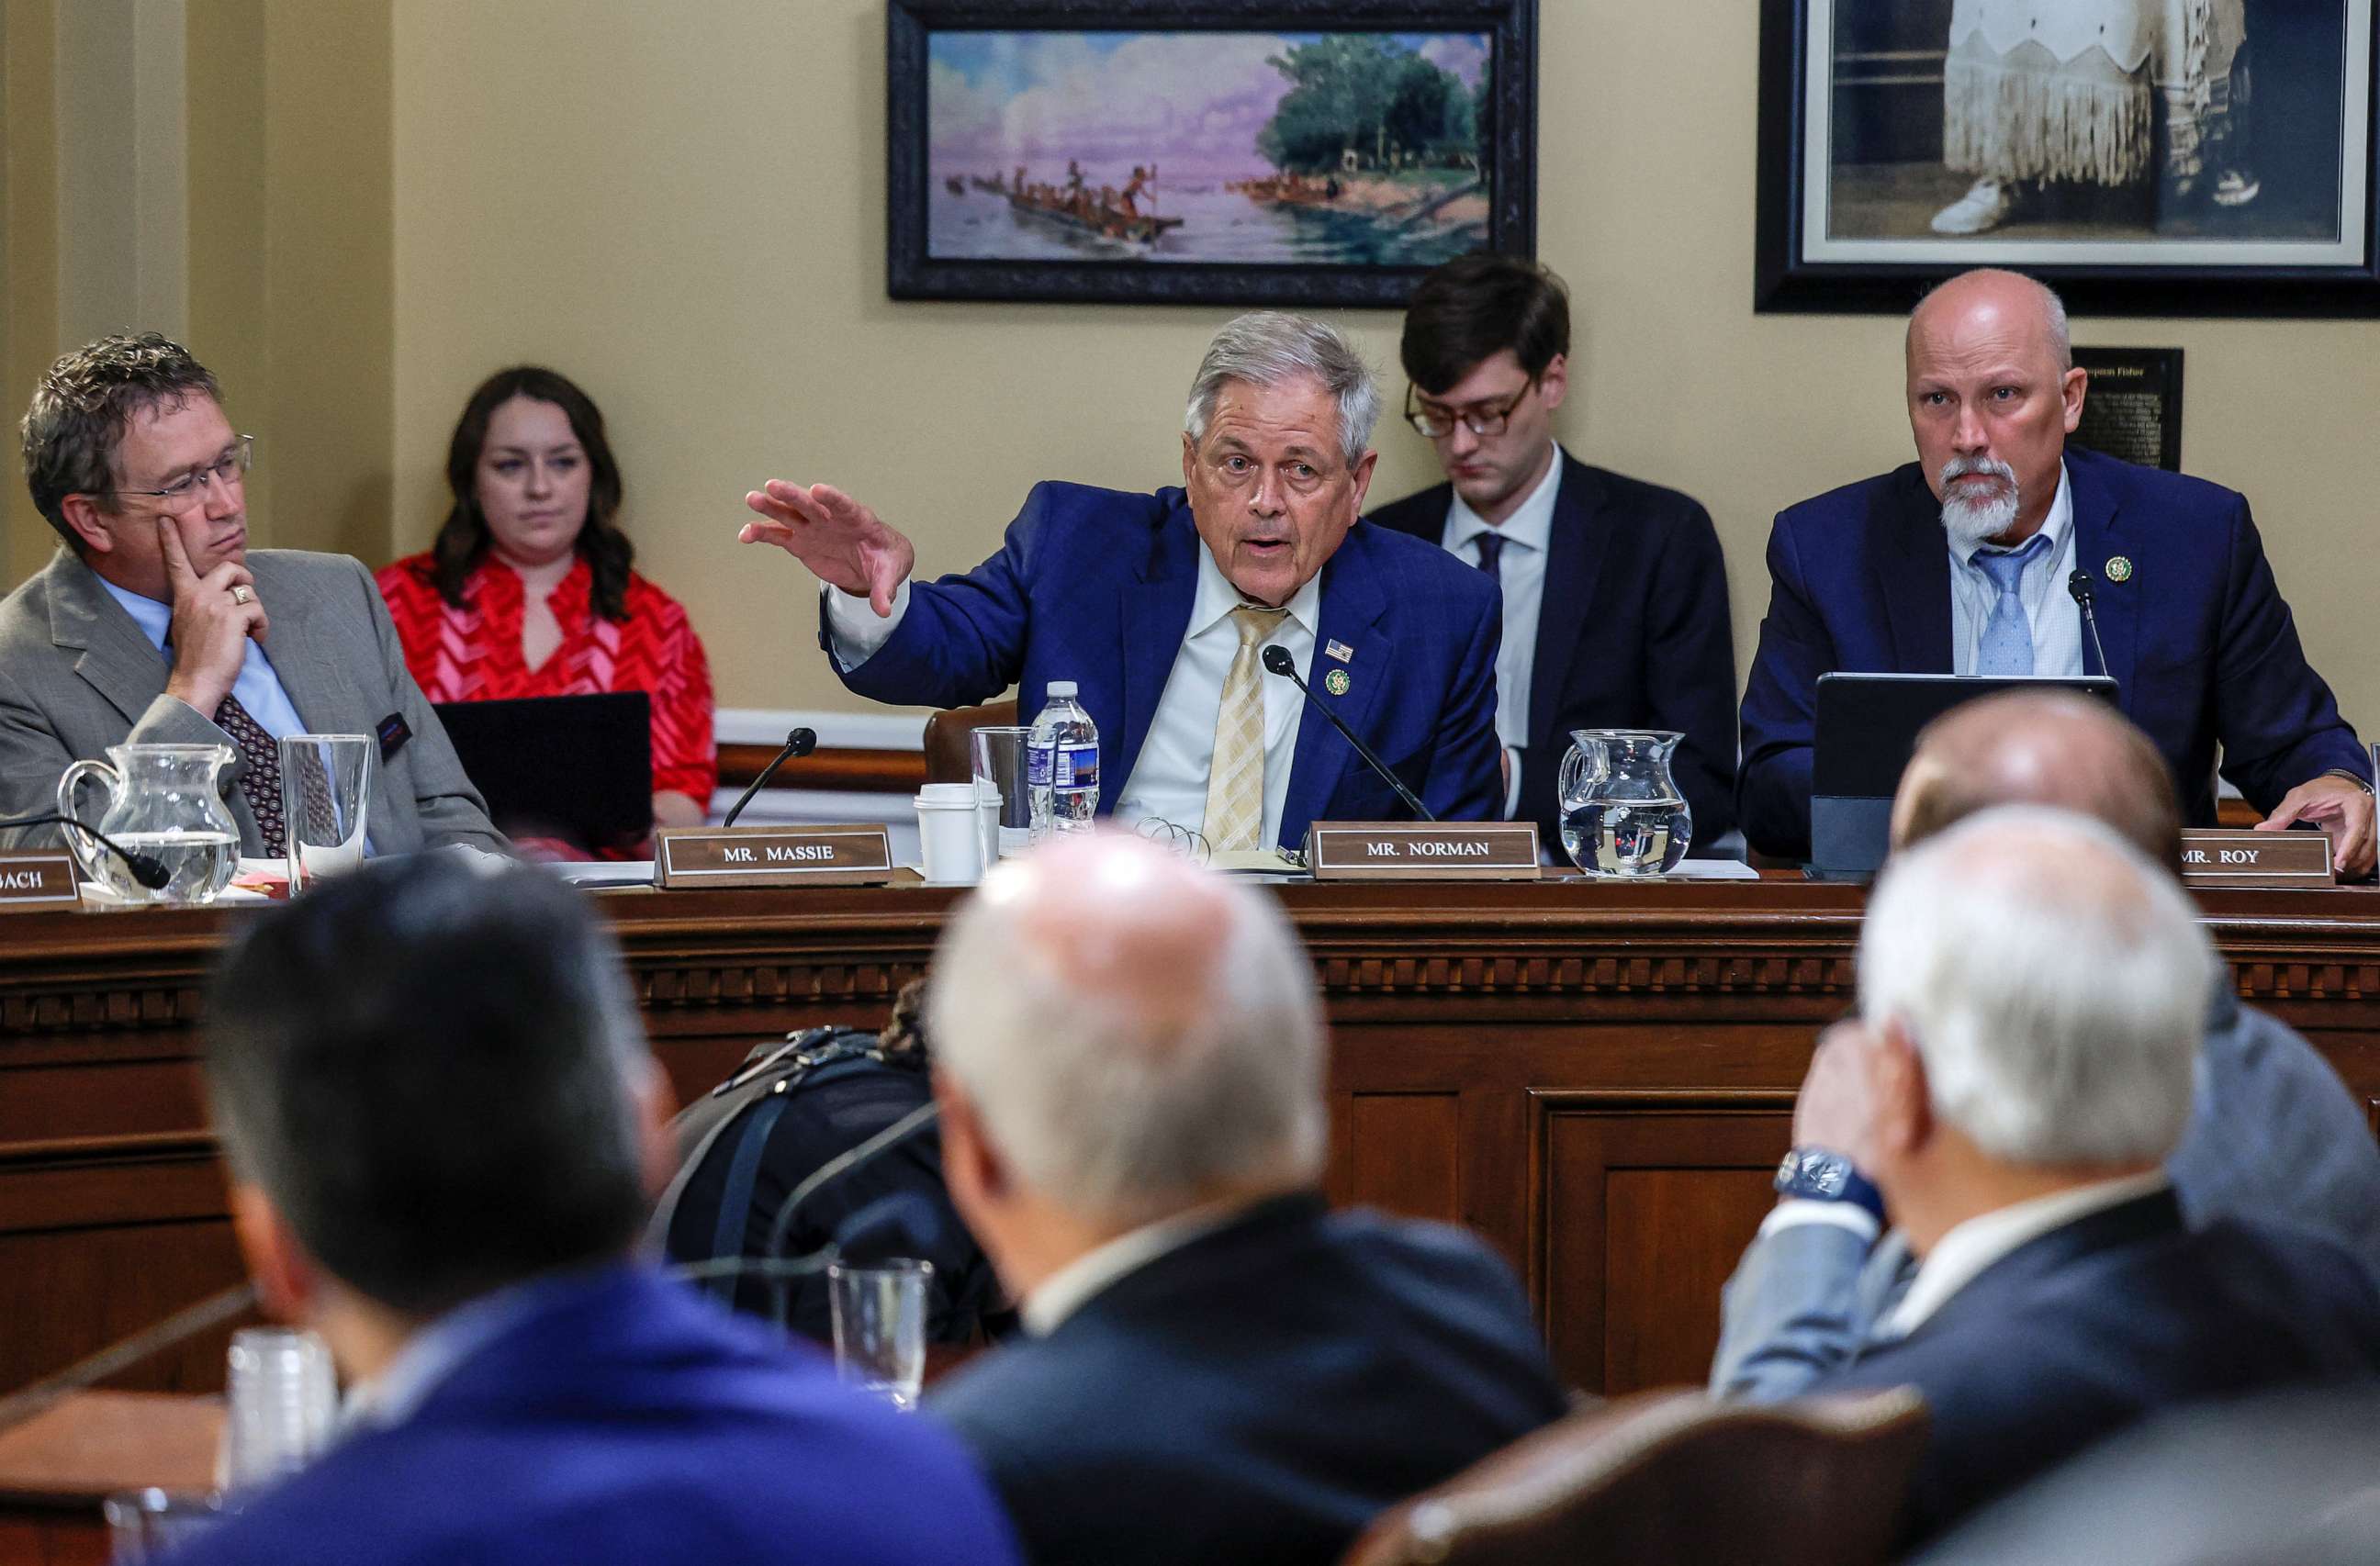 PHOTO: Representative Norman (R-SC) questions a witness alongside Representatives Massie (R-KY) and Roy (R-TX) during a House Committee on Rules hearing about whether to raise the United States' debt ceiling and avoid default, the Capitol, May 30, 2023.